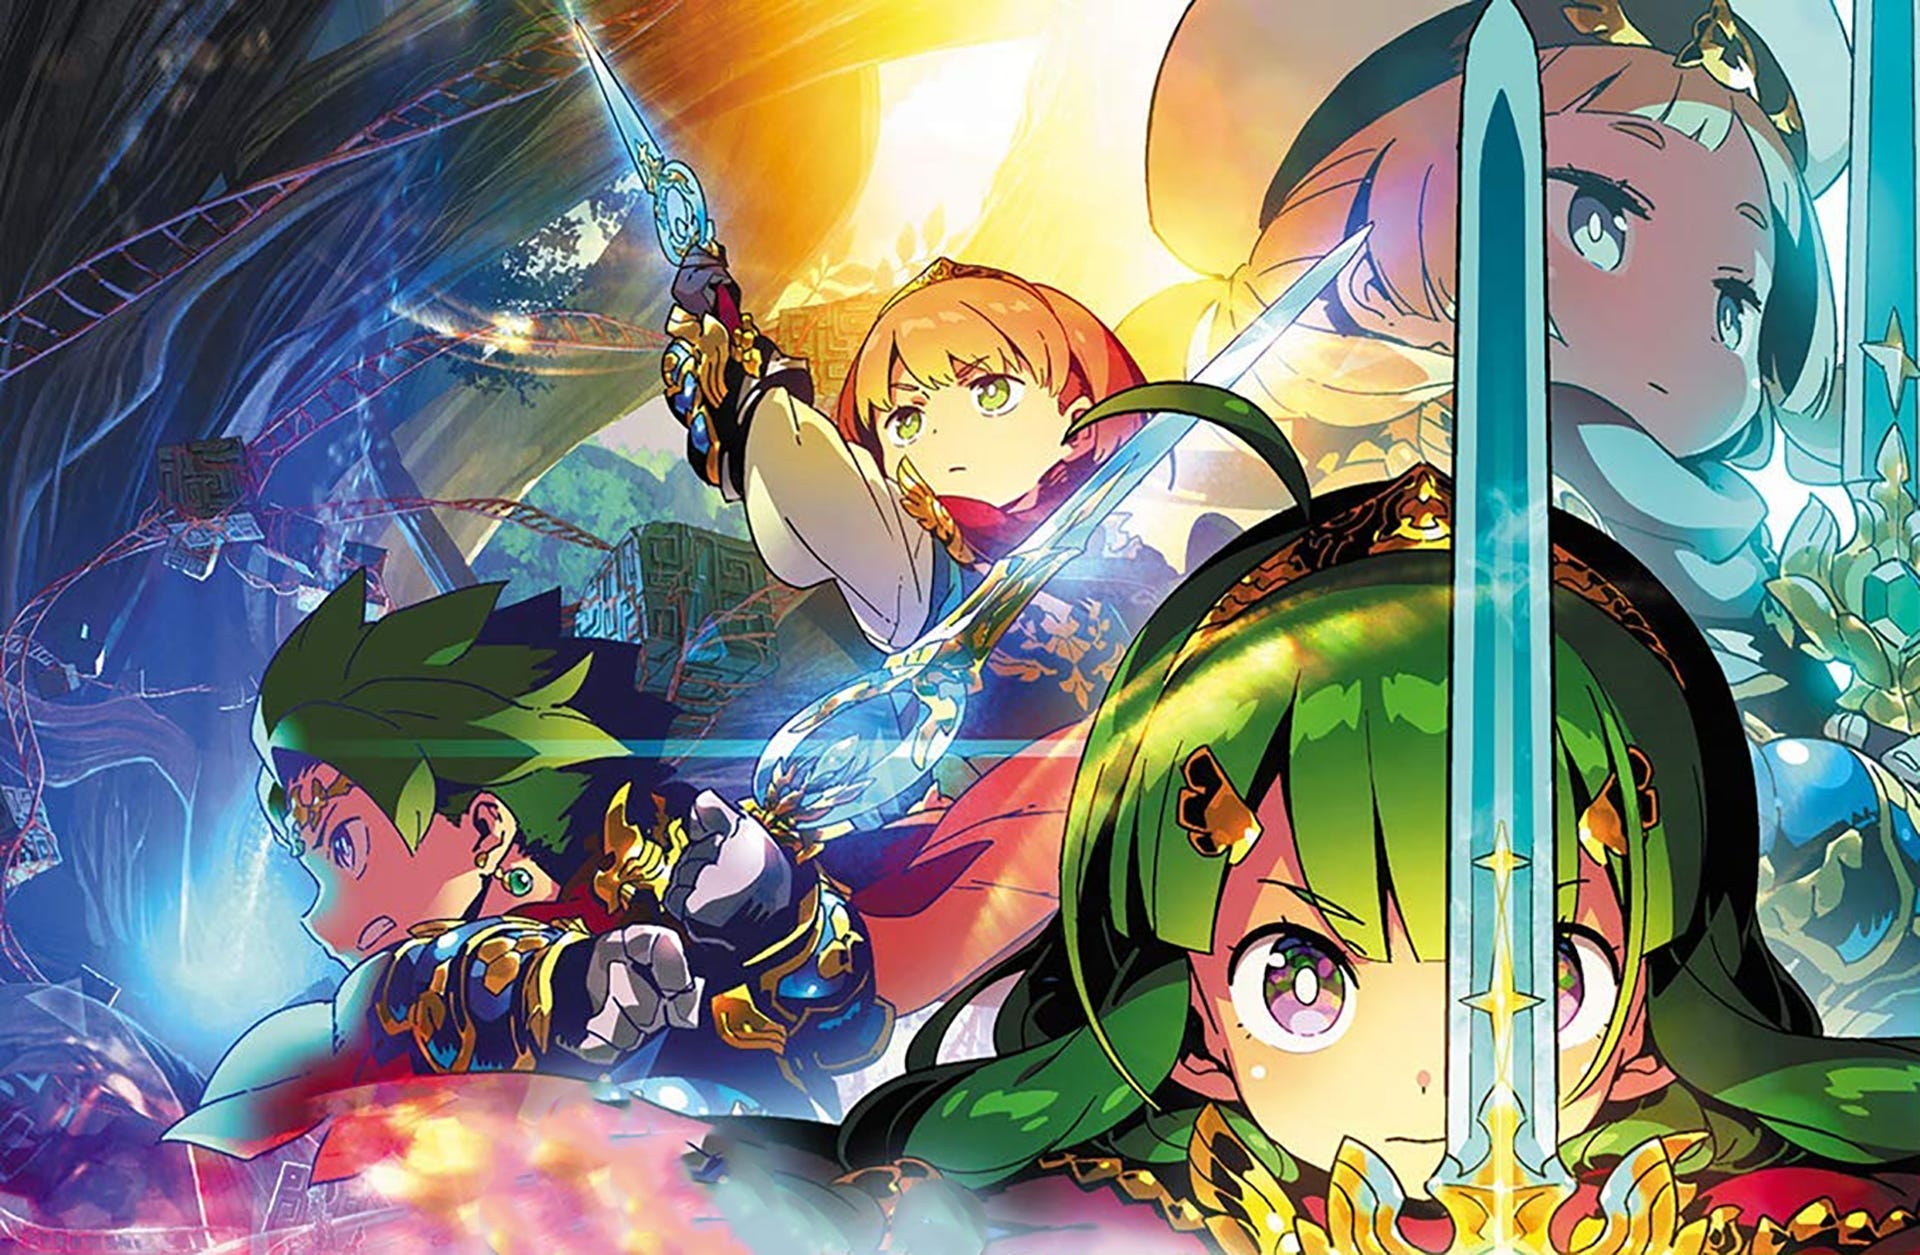 New Atlus Interview Vaguely Implies Currently Unknown Title in the Works; Perhaps Etrian Odyssey?